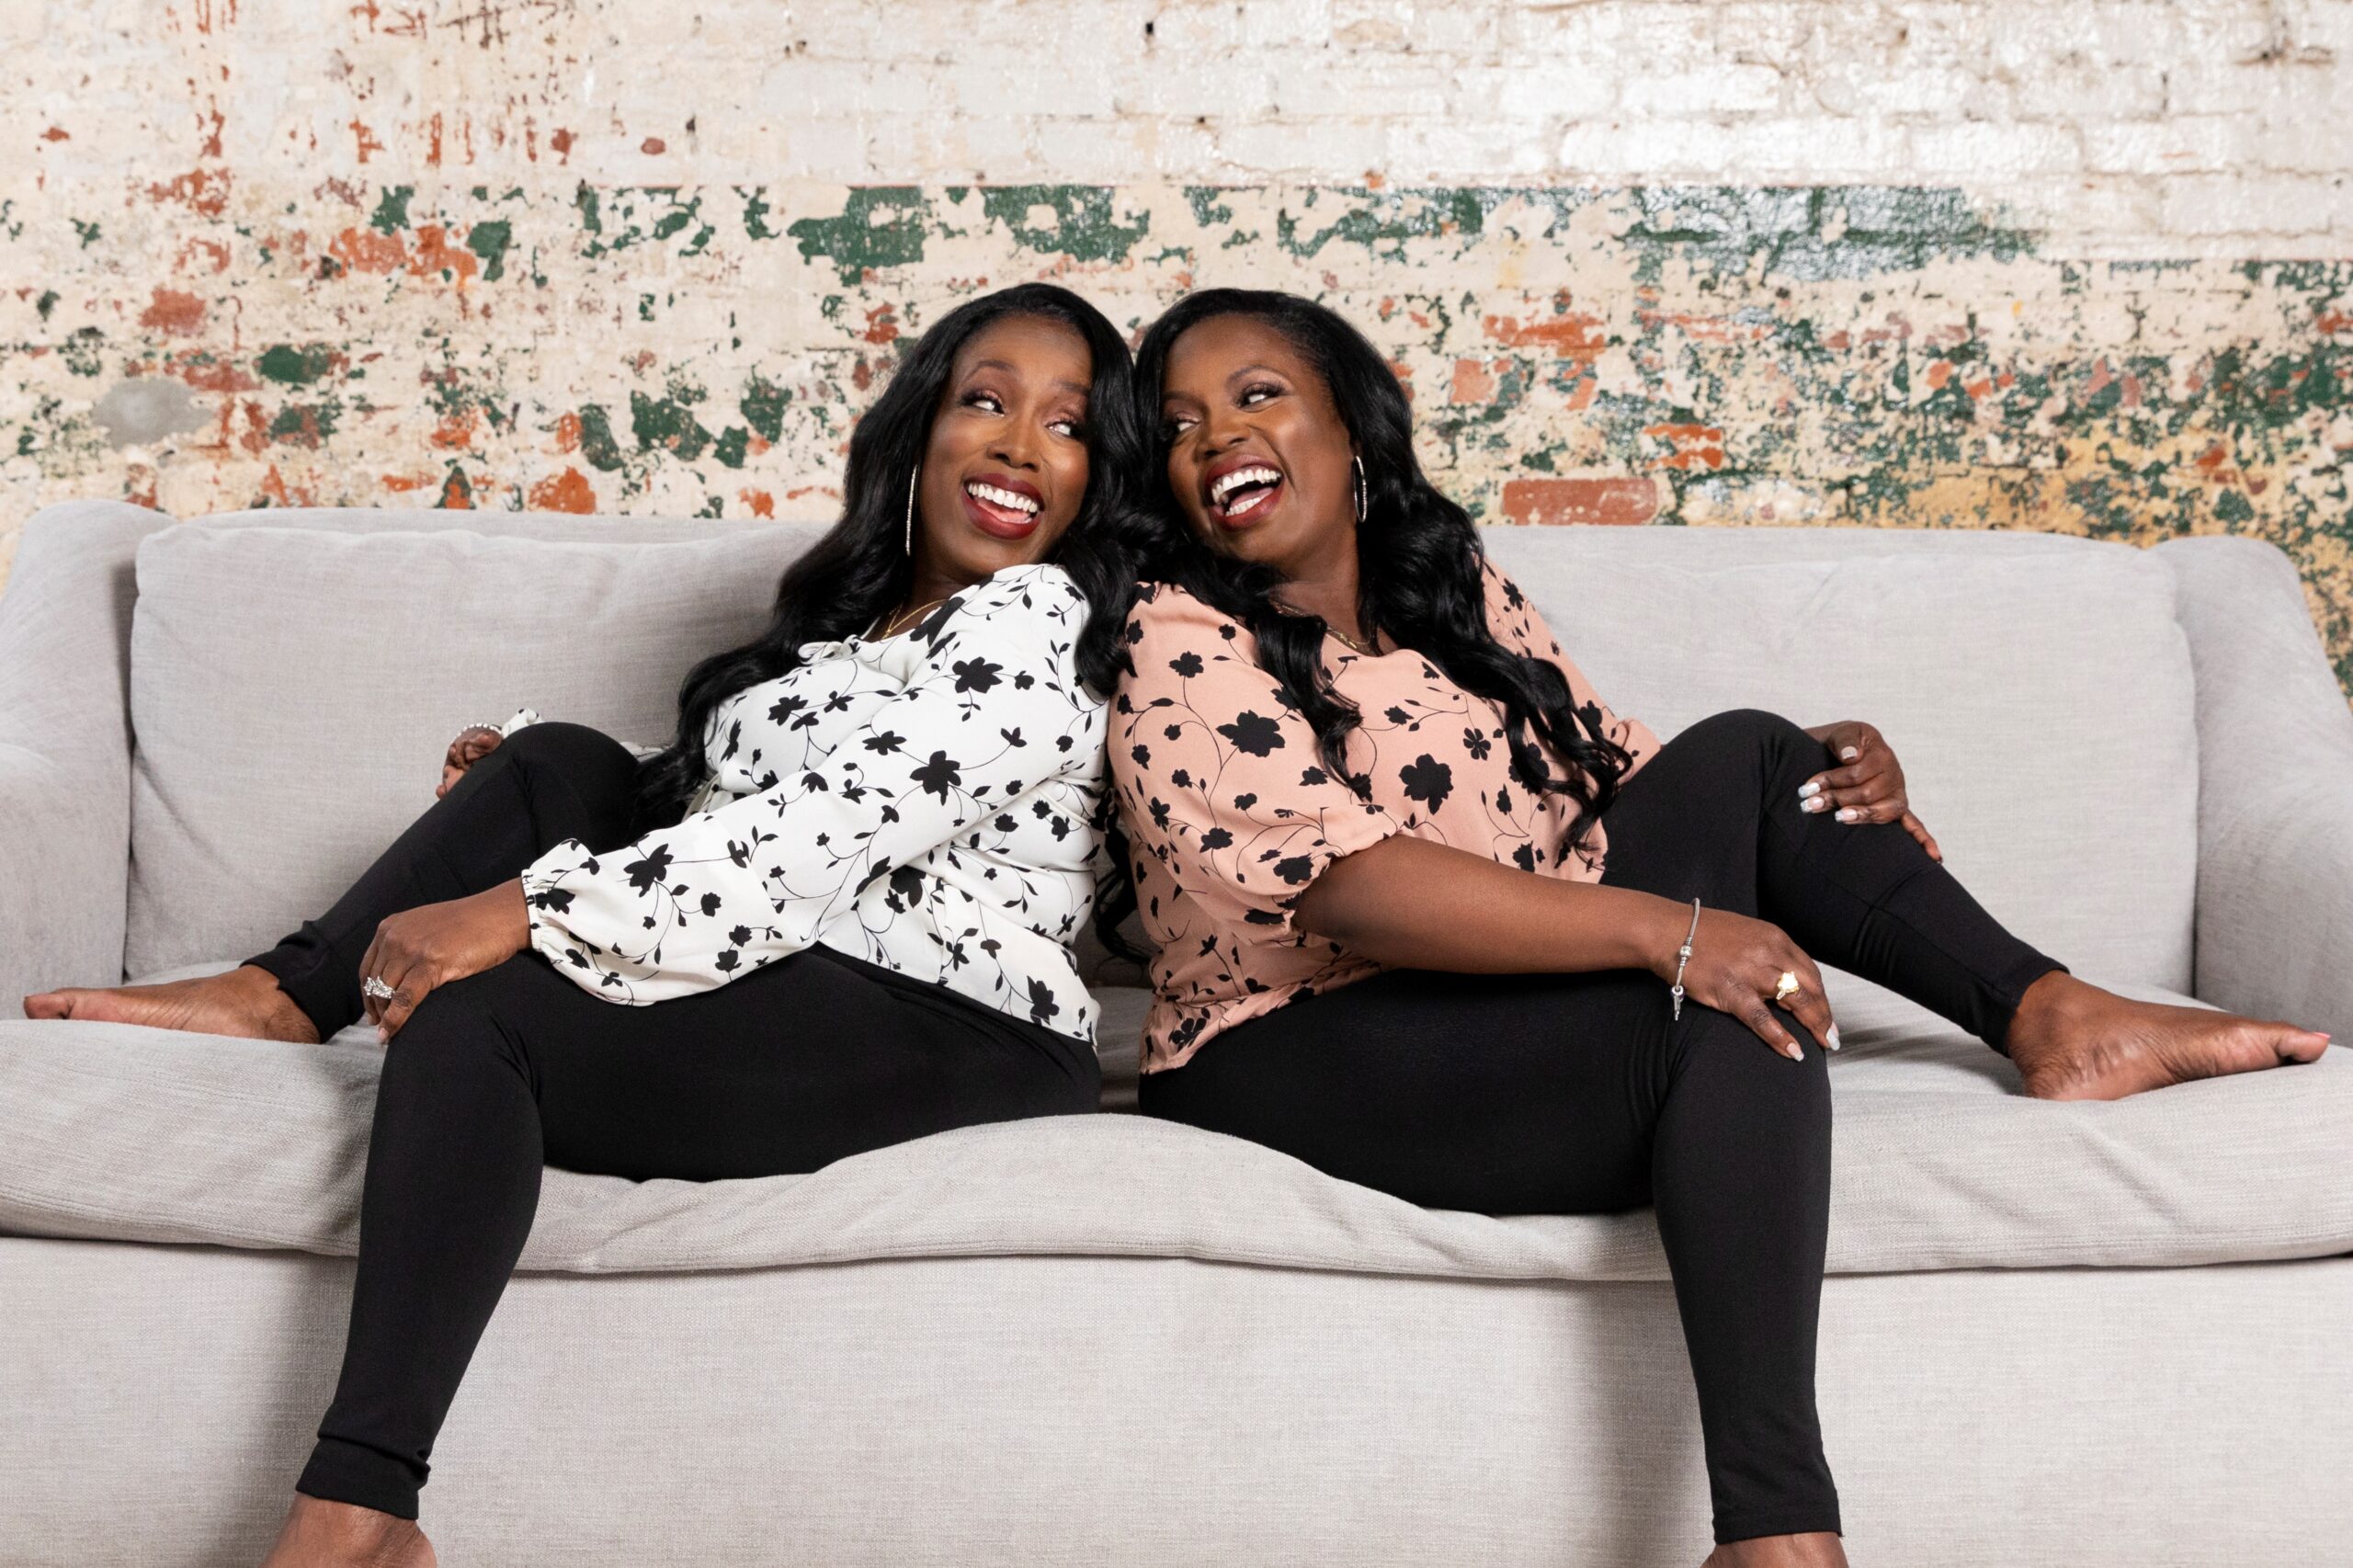 Get To Know These Extreme Sisters, Patrix & Patrica! FEMI MAGAZINE